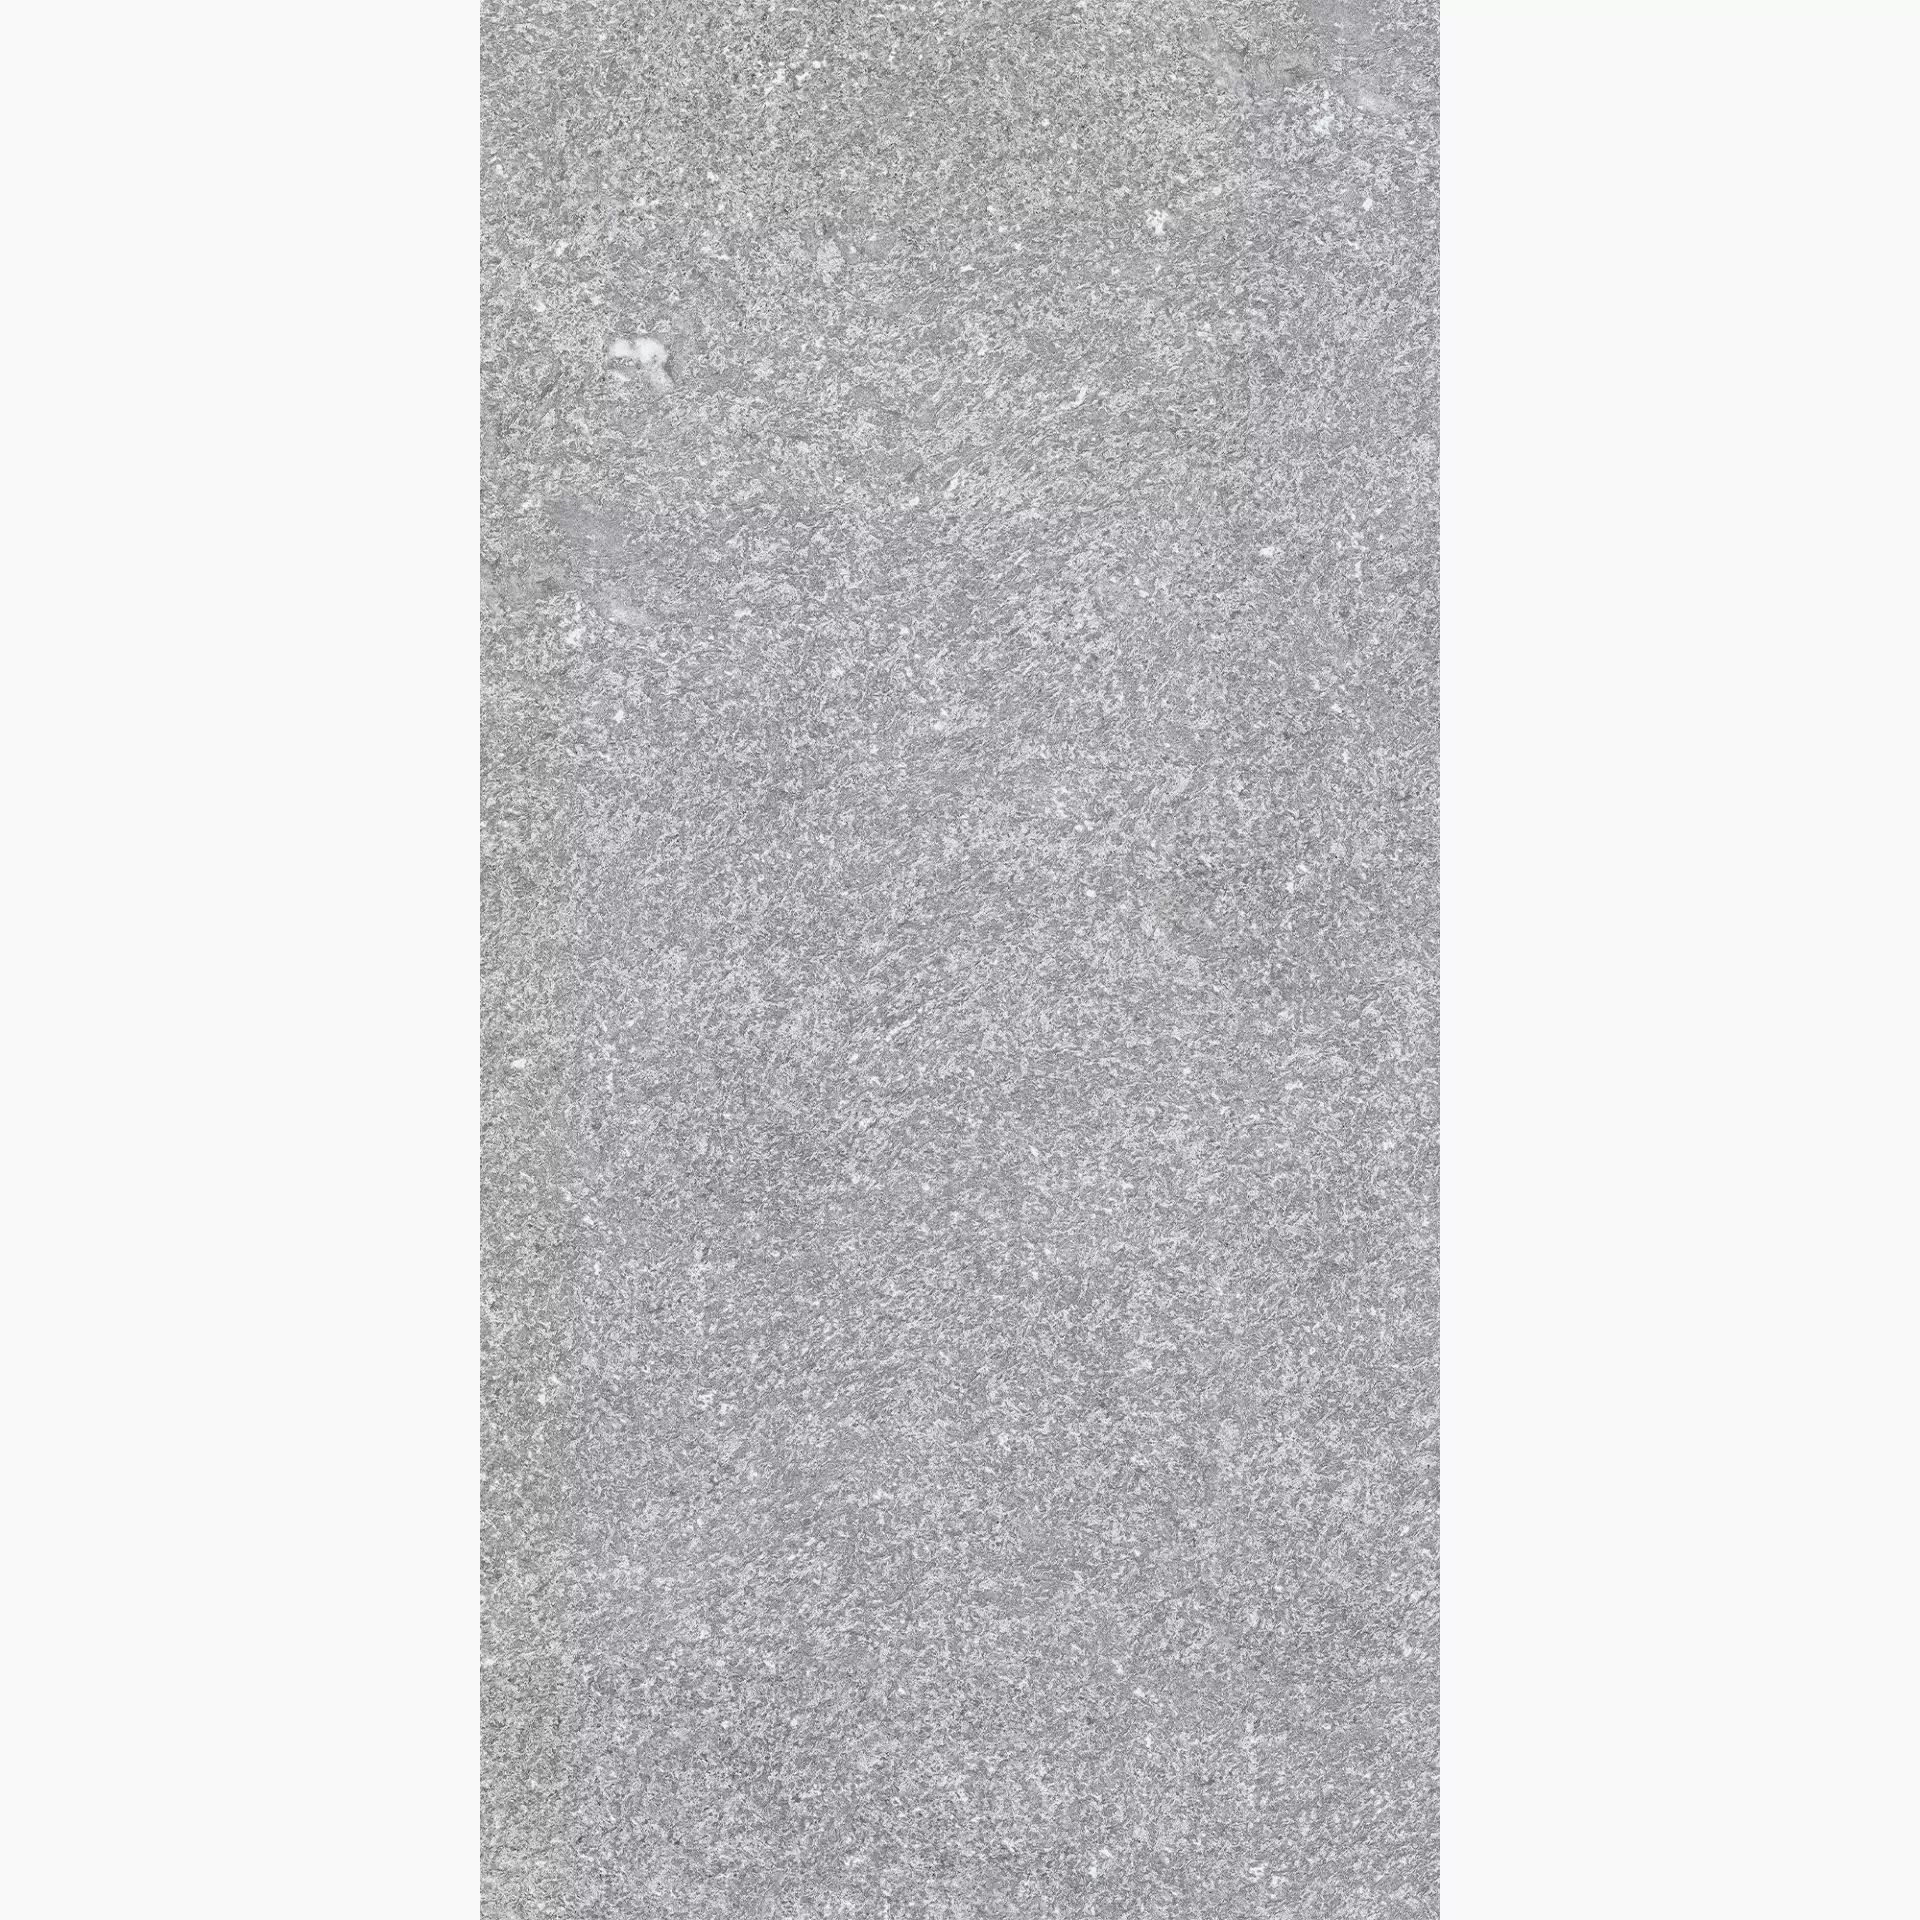 Caesar Shapes Of It Sestriere Naturale AFM4 60x120cm rectified 9mm